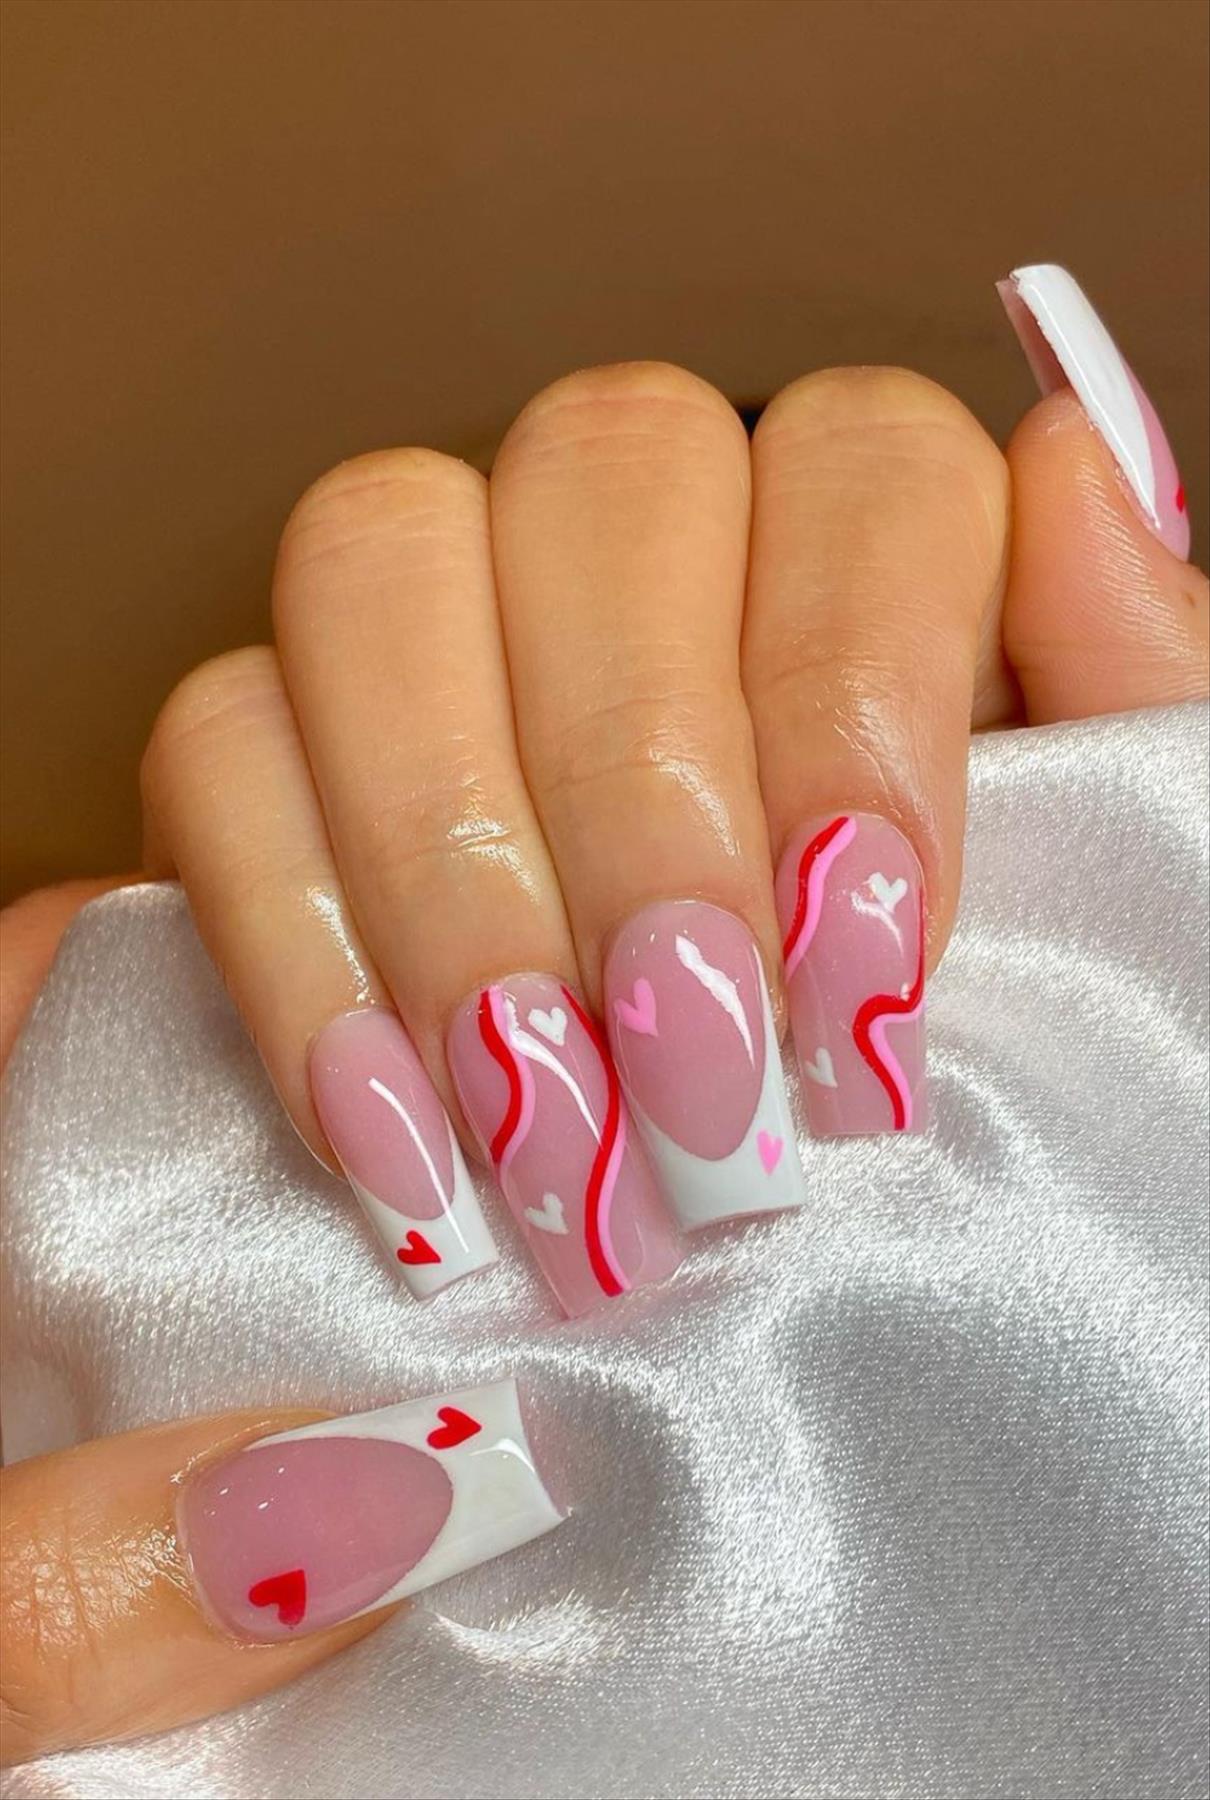 Cute Valentine's Day Acrylic Nails Art For 14th, Feb Nails